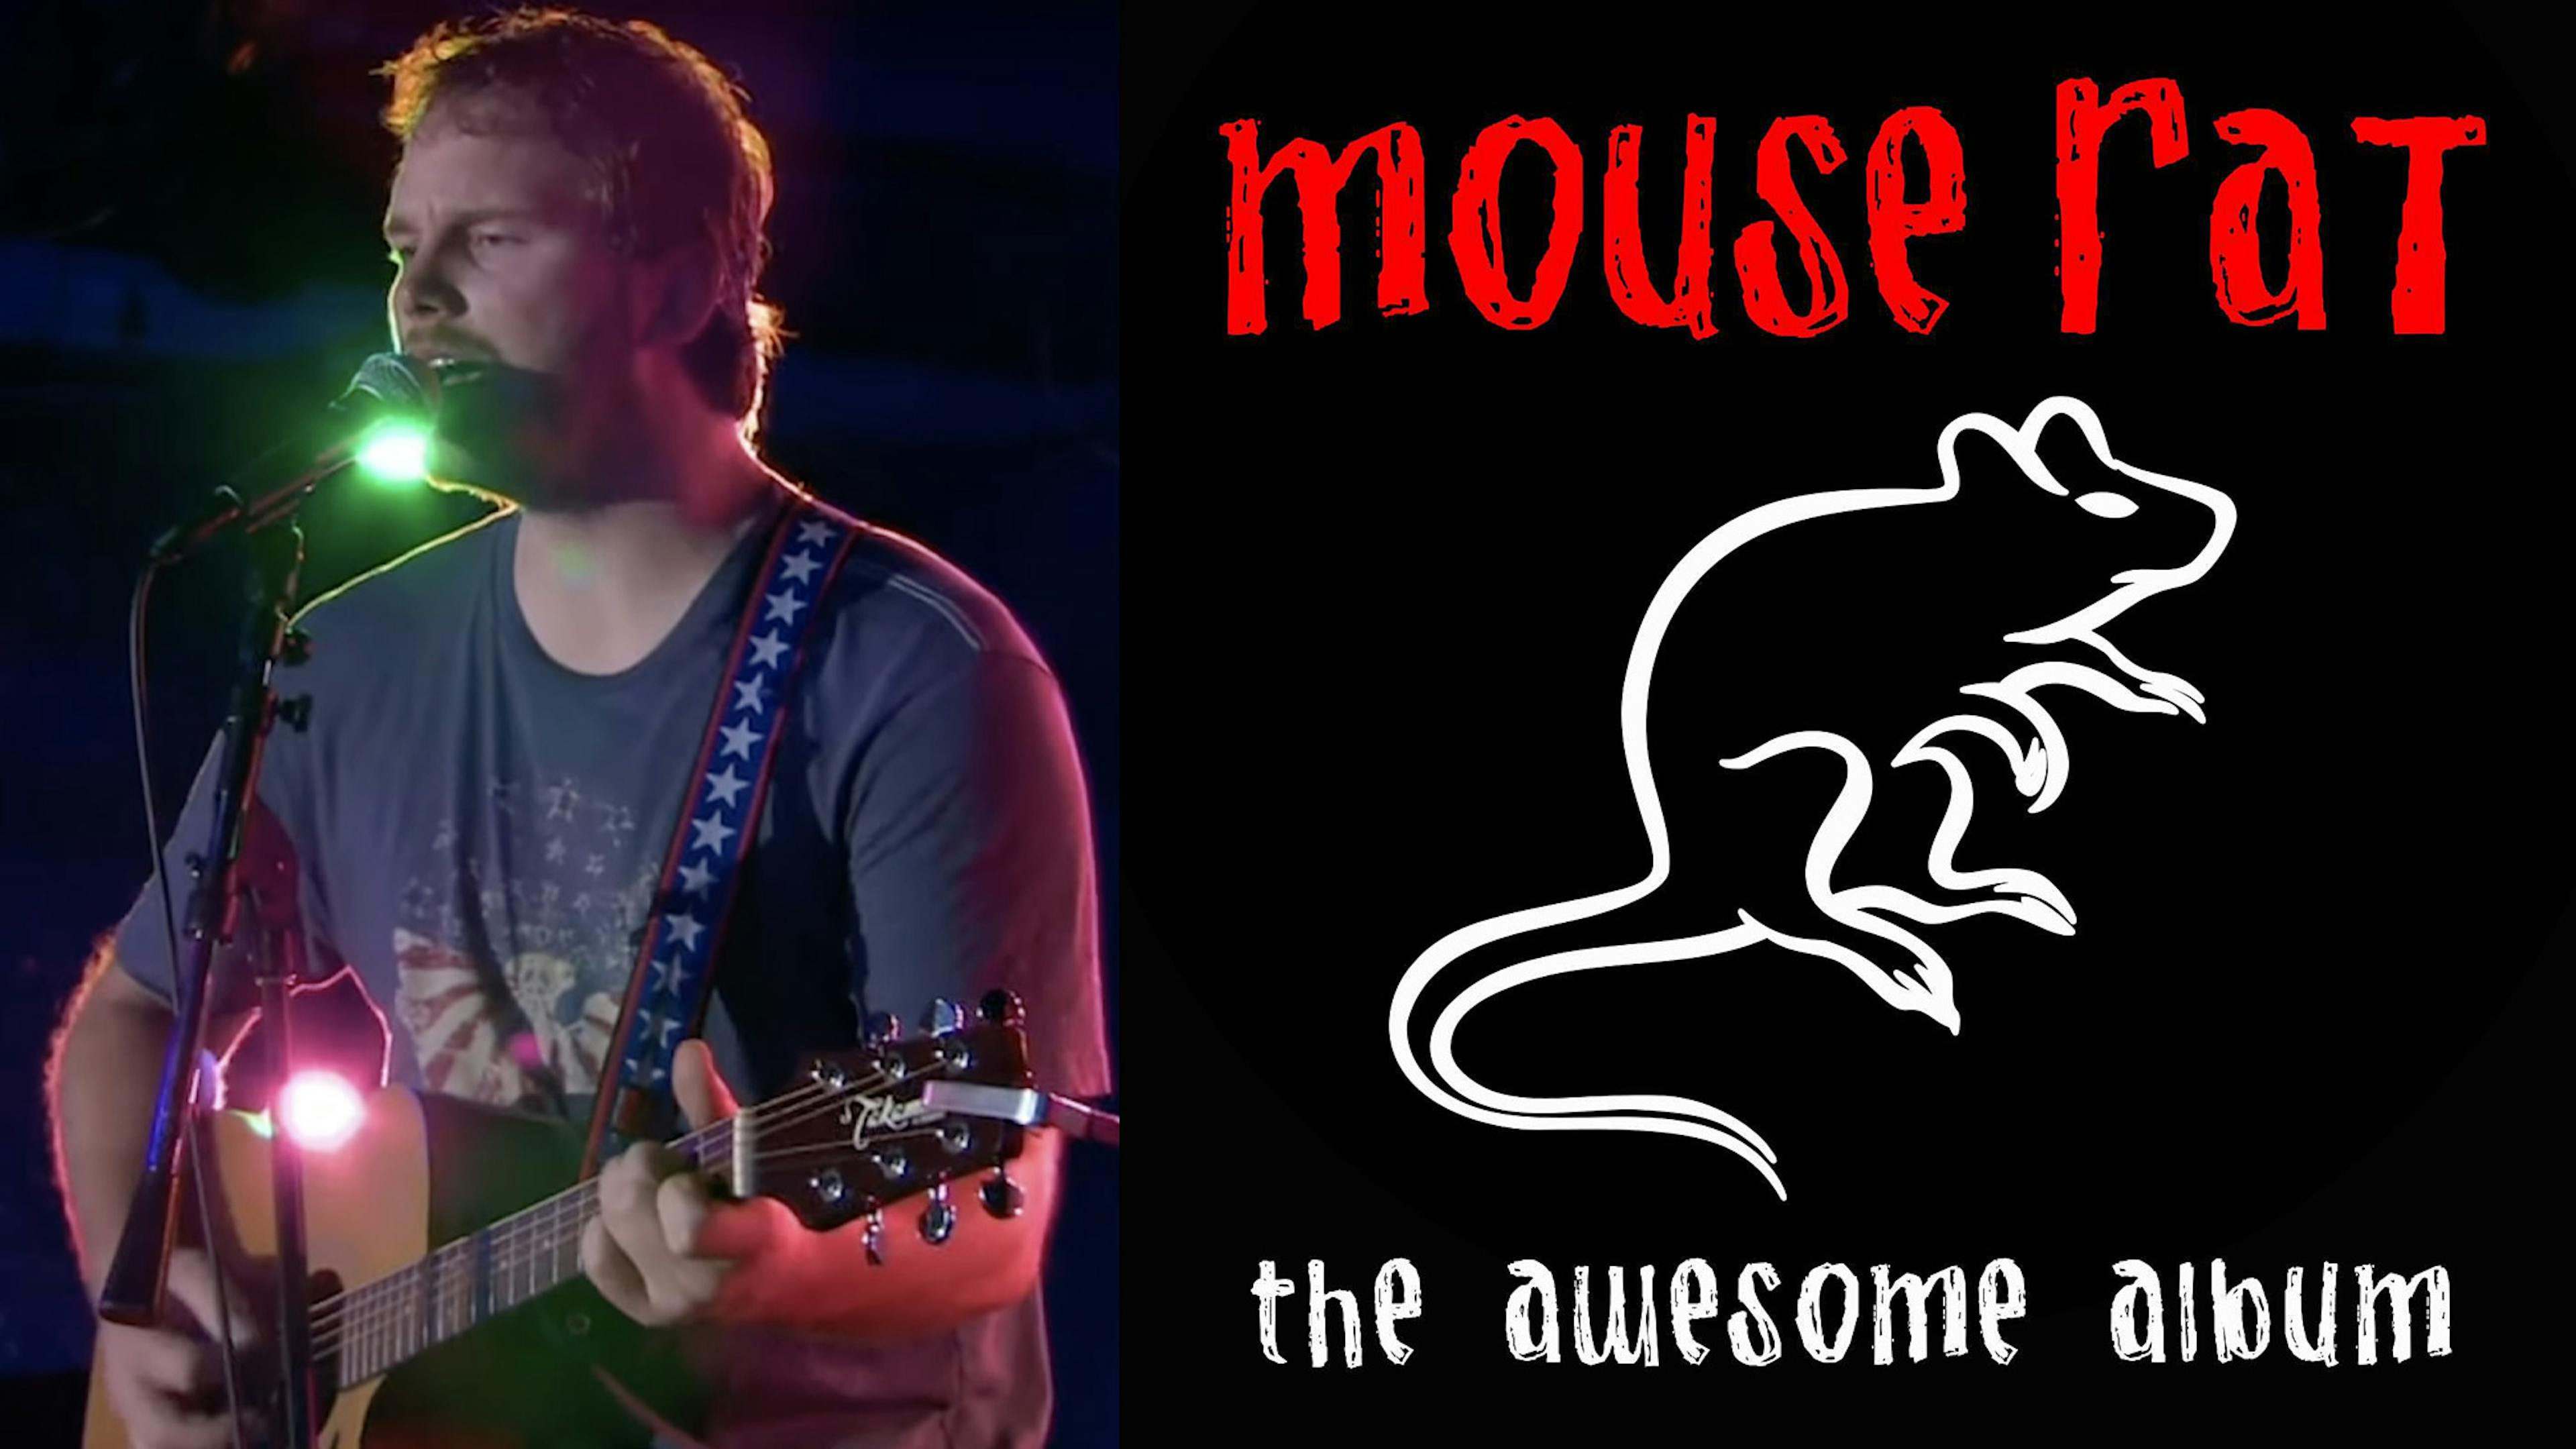 Chris Pratt’s Parks And Recreation band Mouse Rat to release The Awesome Album